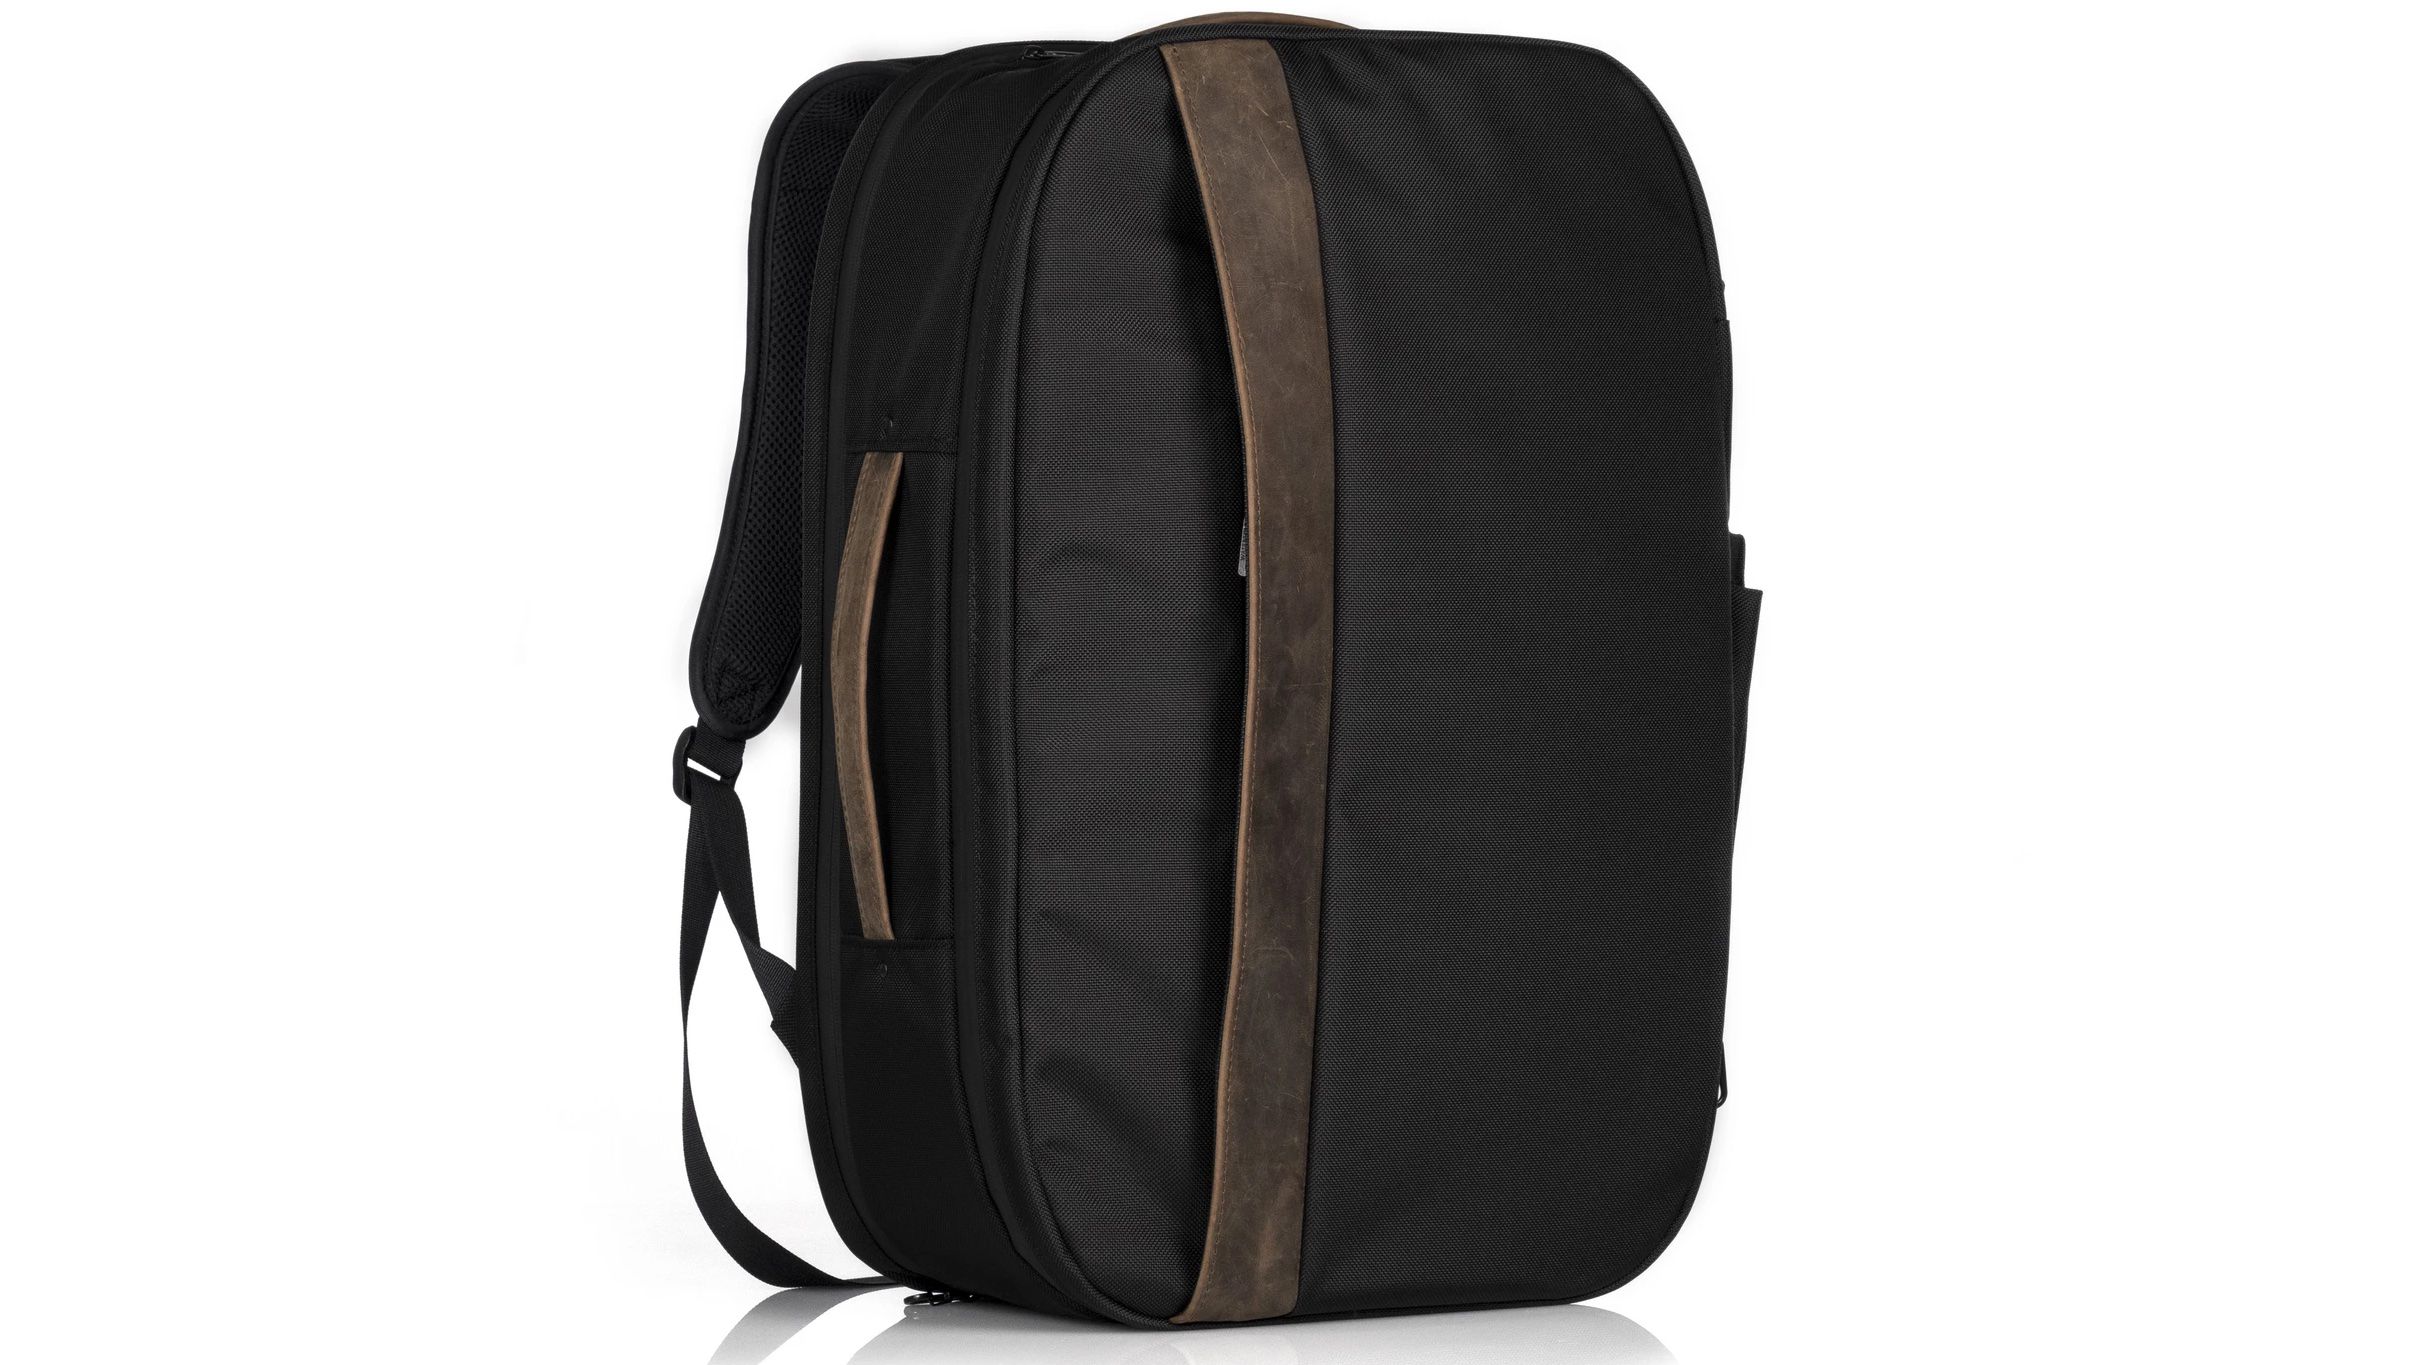 MacRumors Giveaway: Win an Air Travel Backpack From WaterField